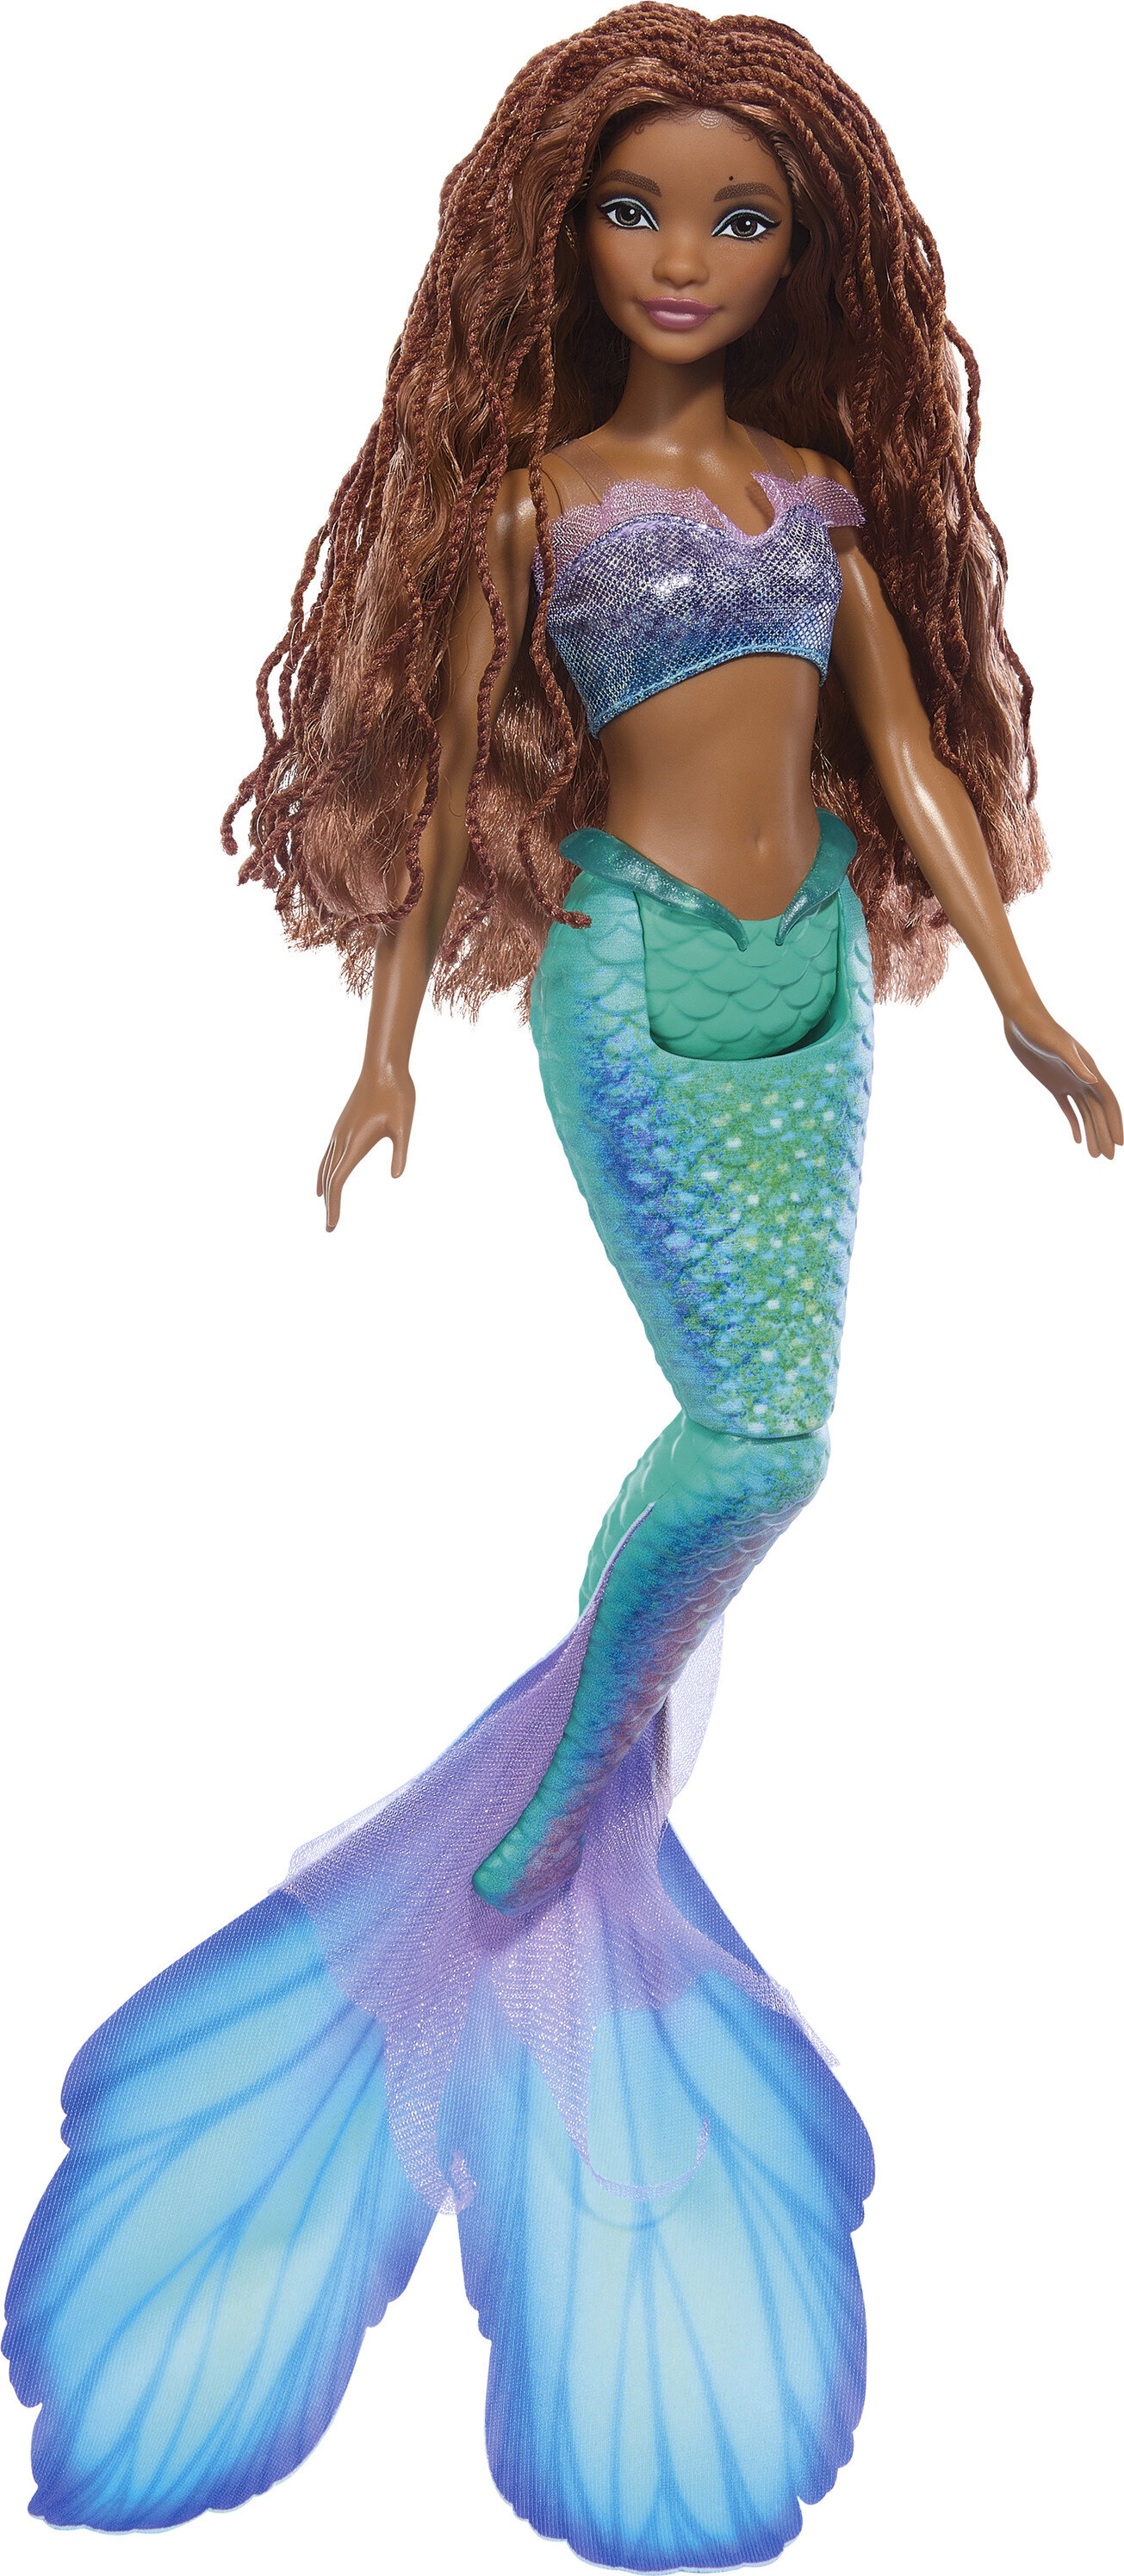 Disney The Little Mermaid Ariel and Sisters Doll Set with 3 Fashion Mermaid Dolls - image 3 of 6